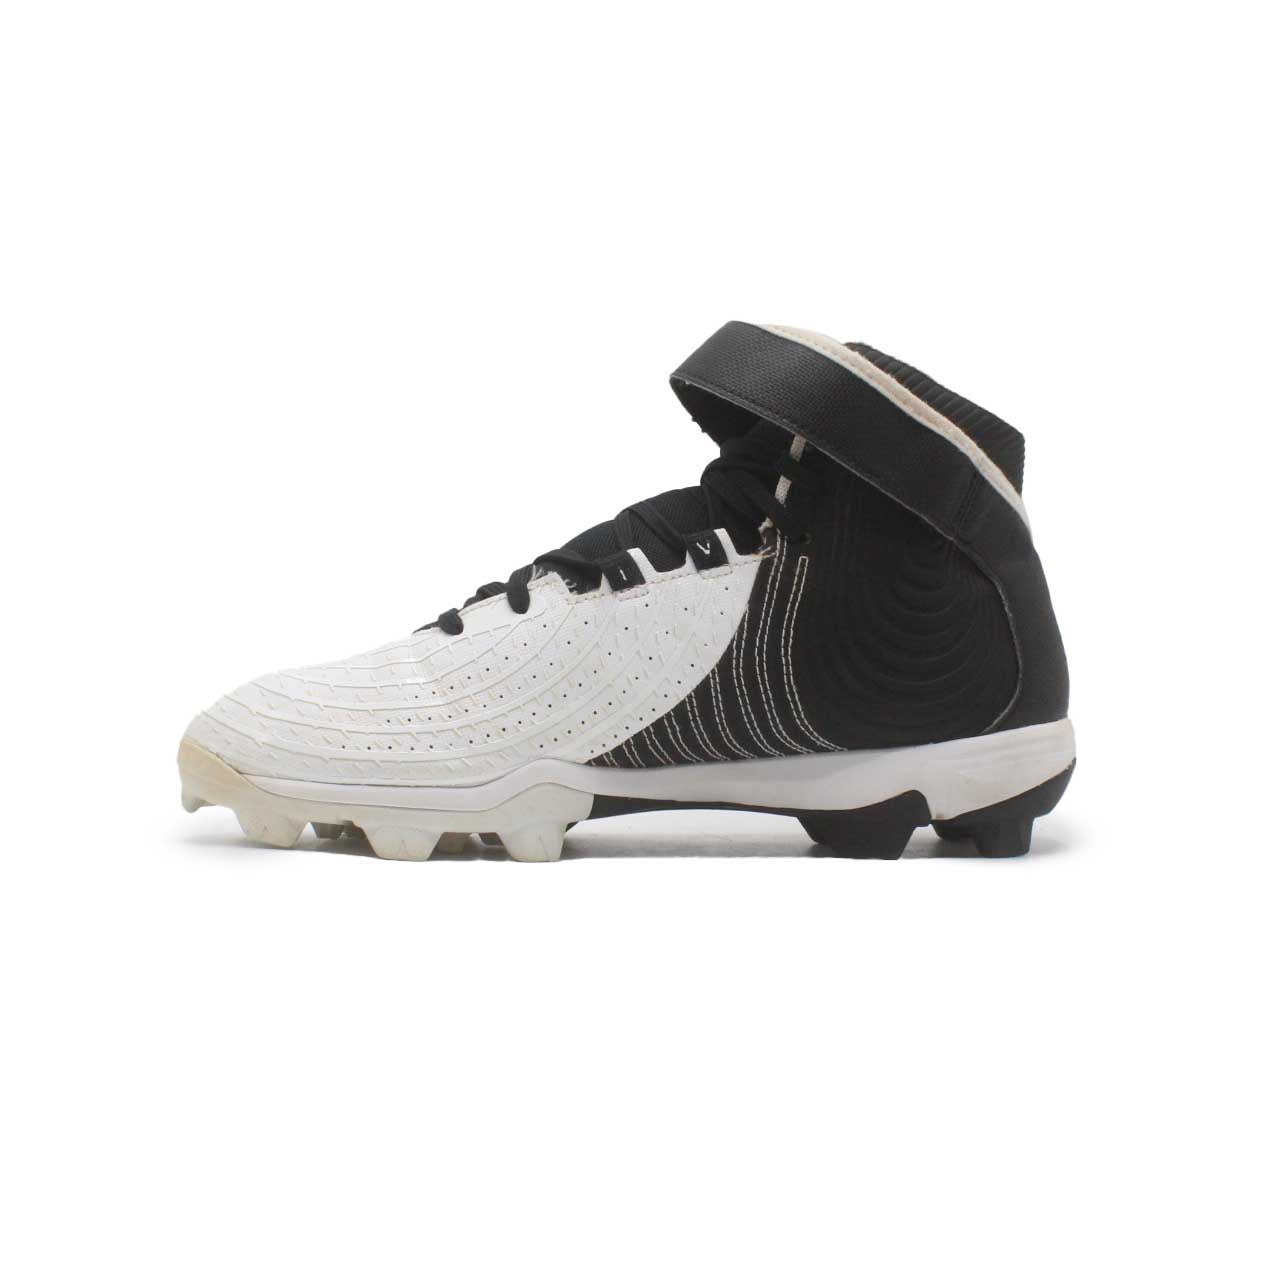 Under Armour Harper 4 Mid Rm Baseball Cleat